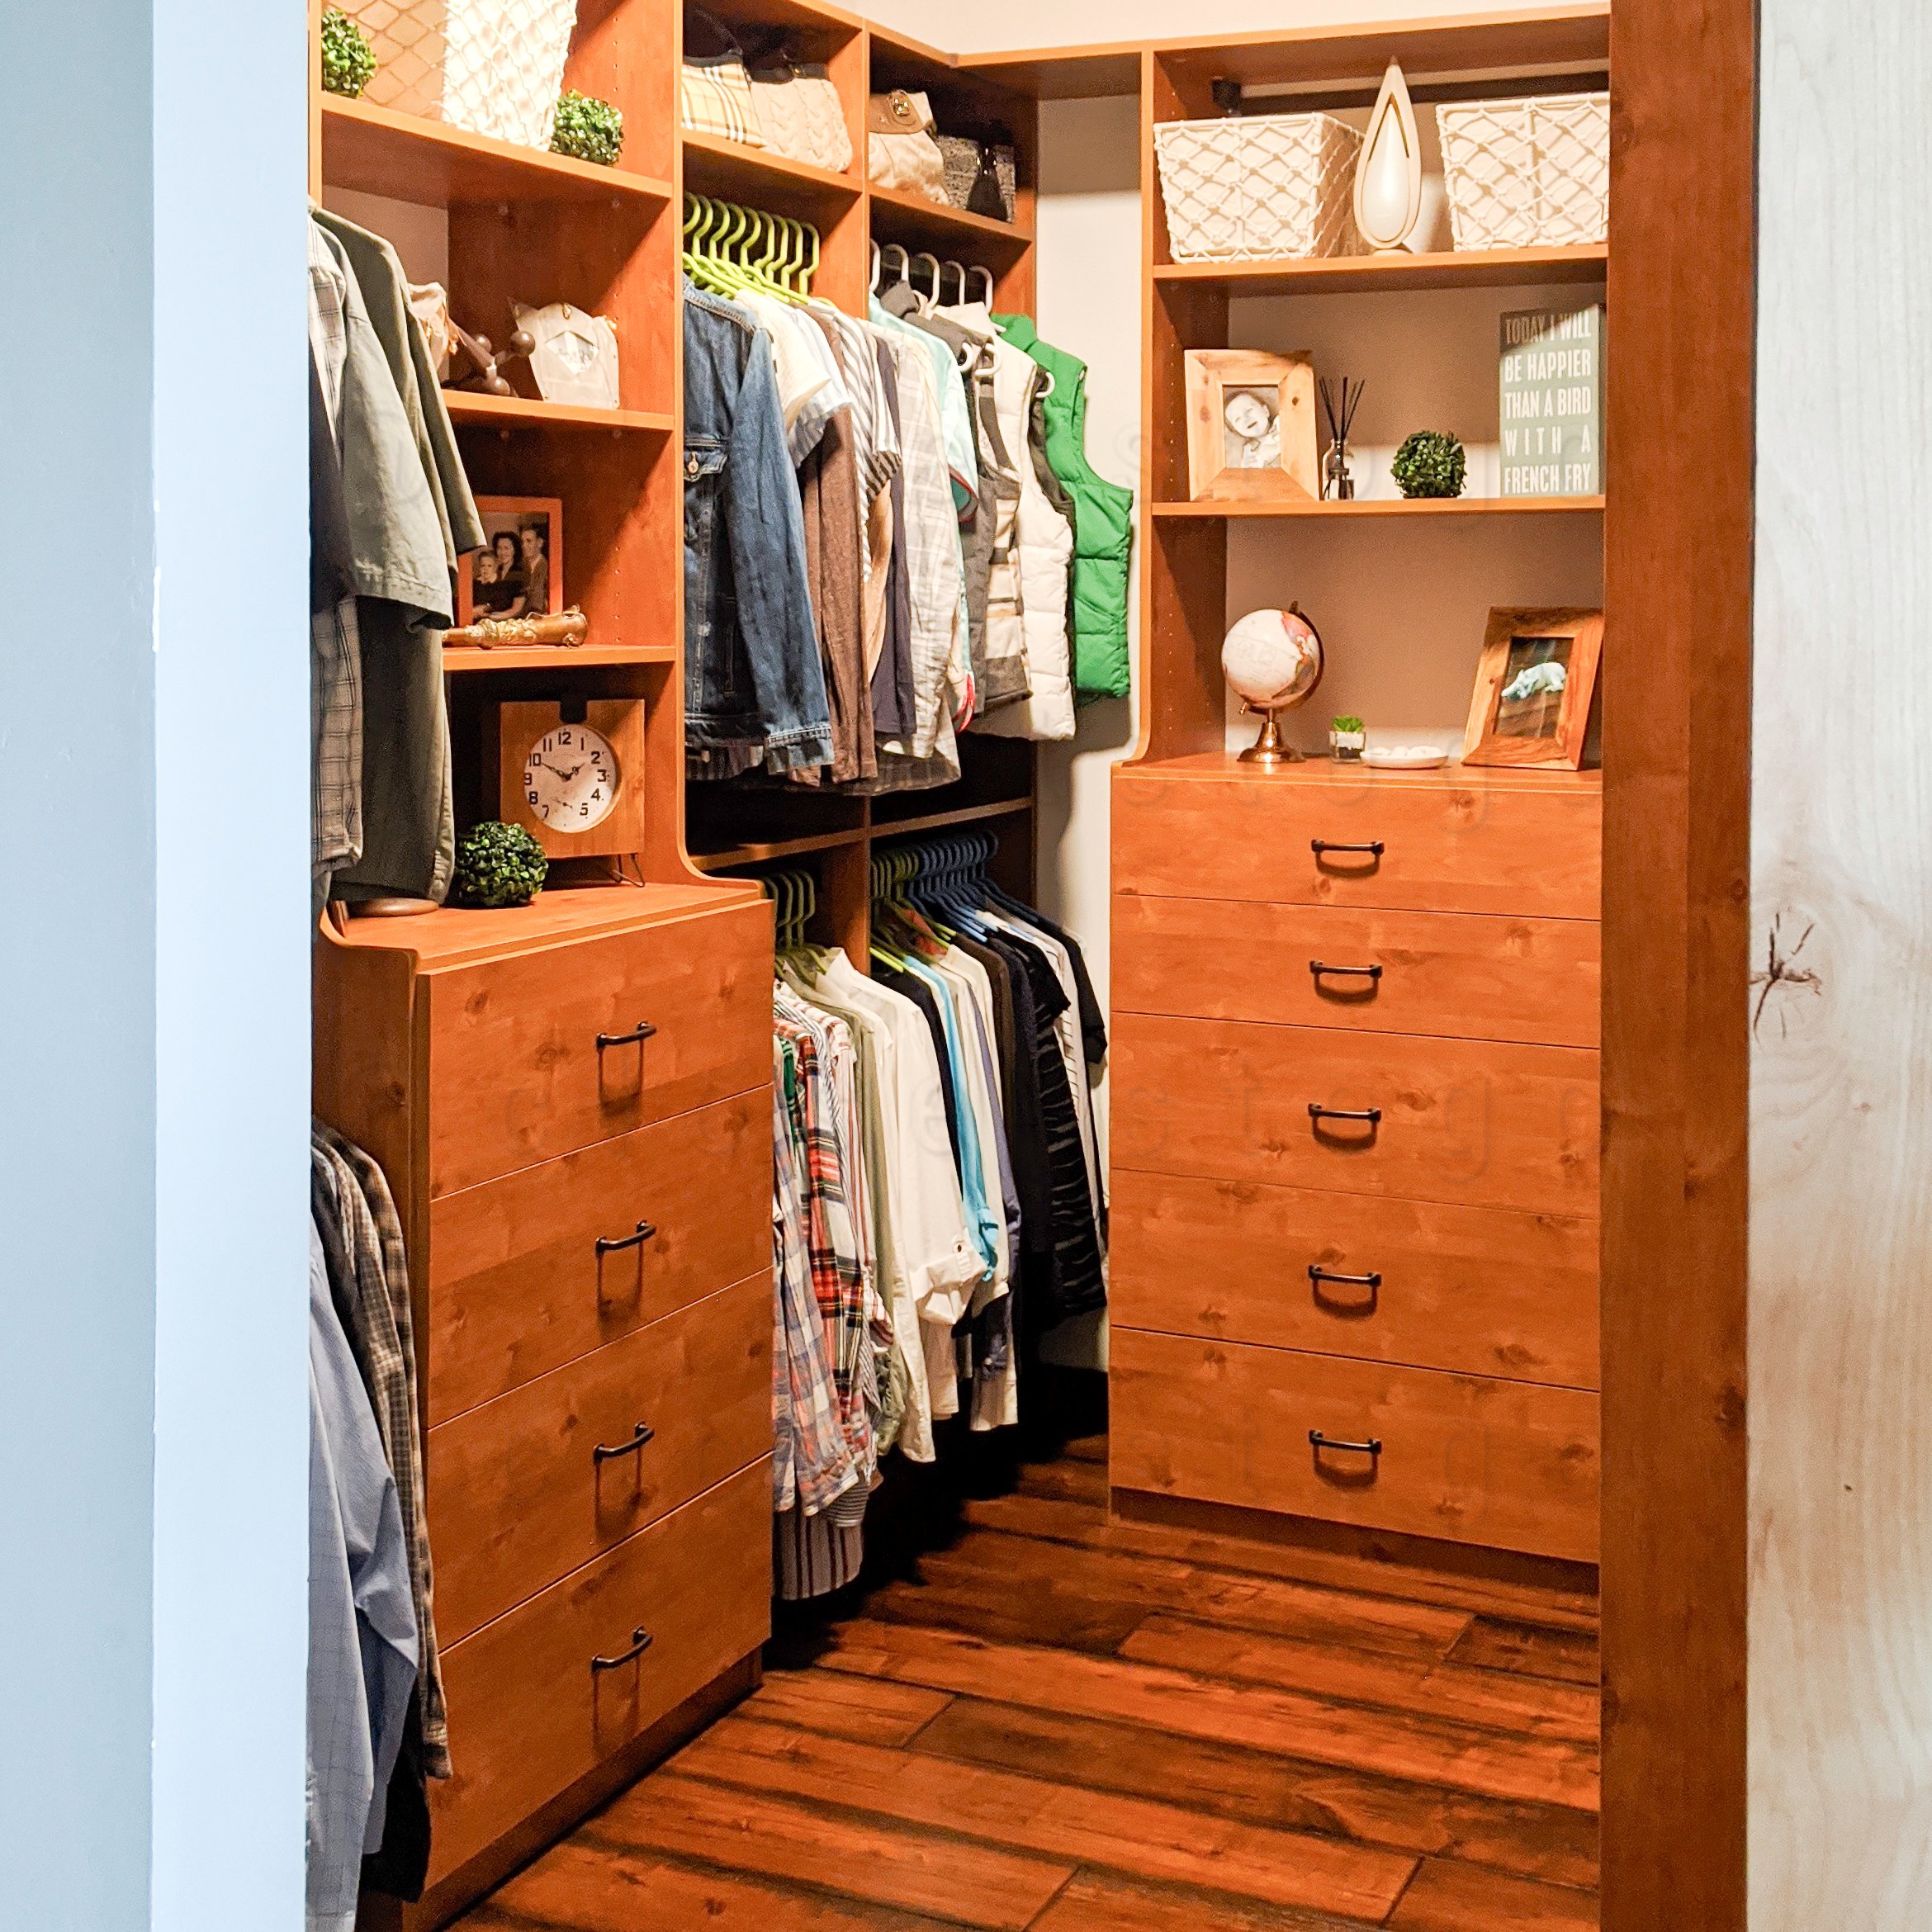 The now complete closet with drawers and clothing. Giving the closet a clean, orderly and organized storage.